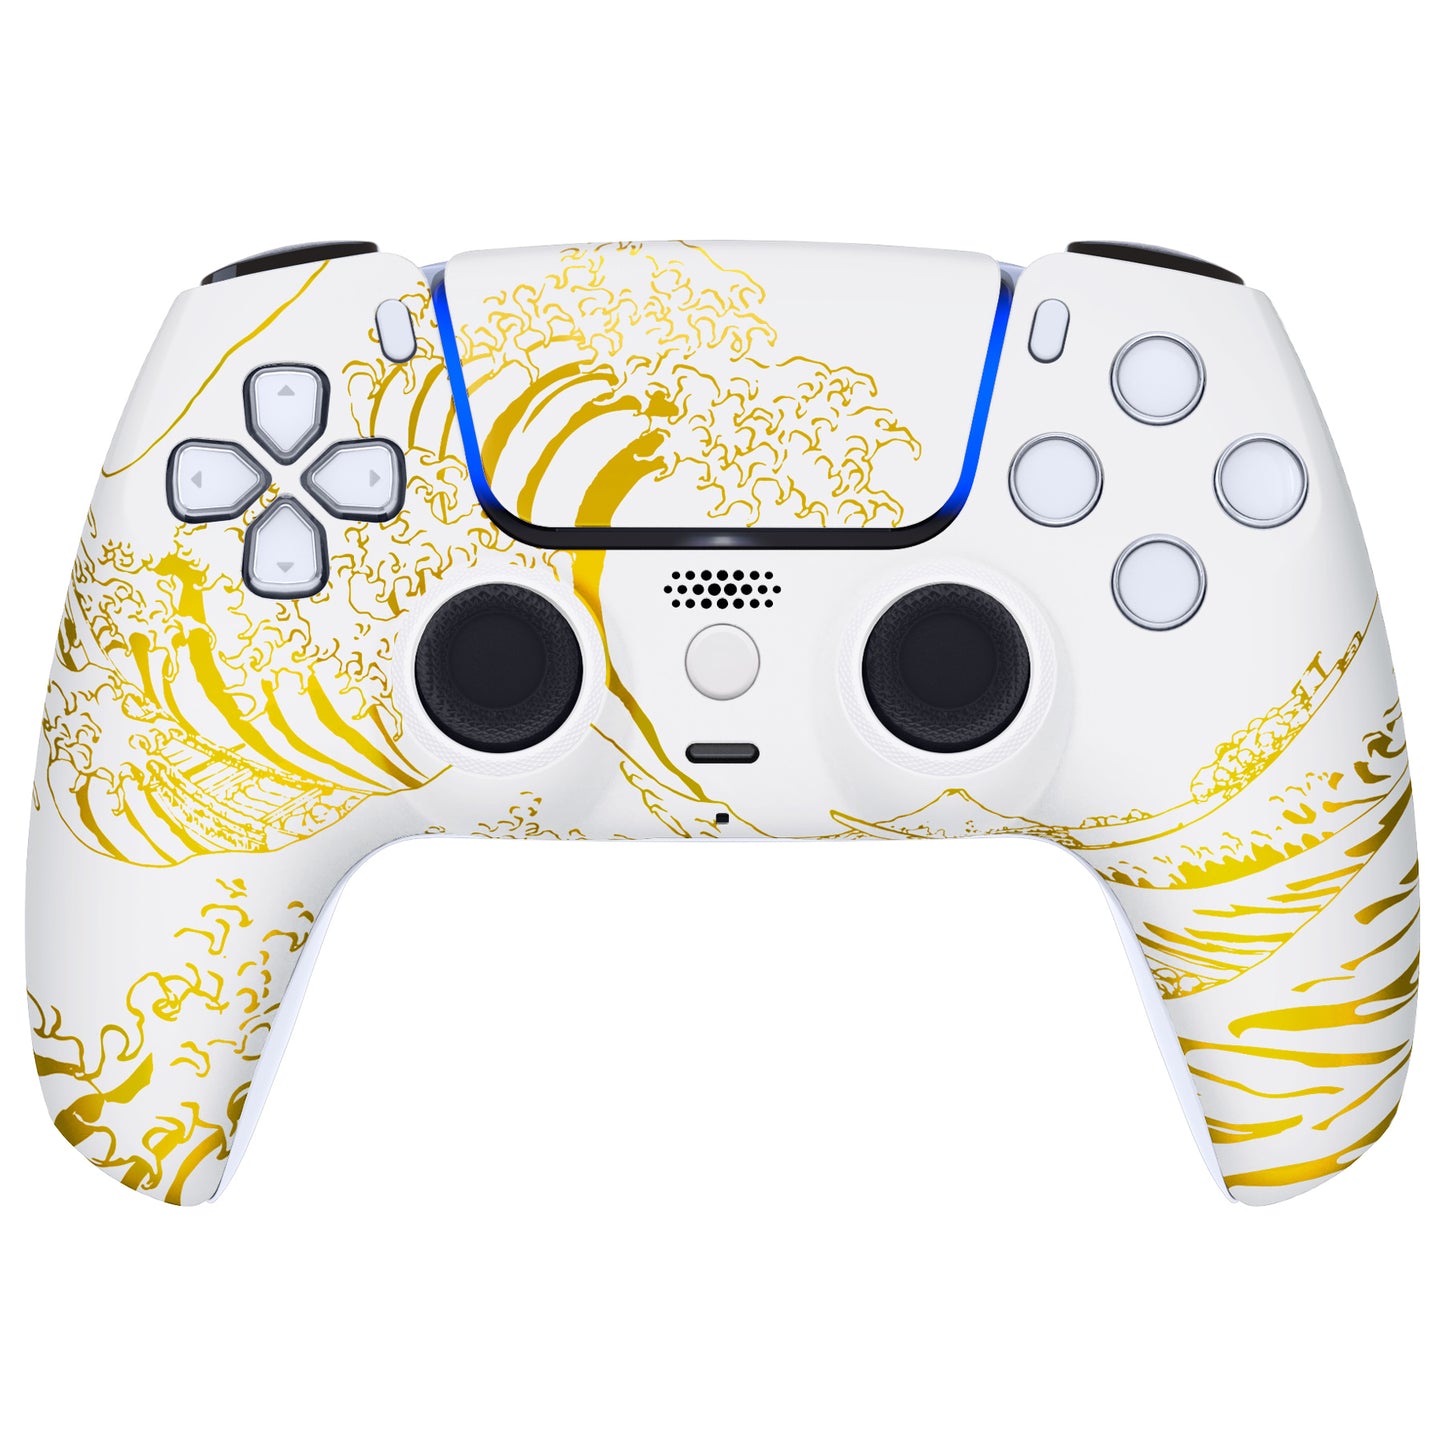 eXtremeRate LUNA Redesigned Replacement Front Shell with Touchpad Compatible with PS5 Controller BDM-010/020/030/040 - The Great GOLDEN Wave Off Kanagawa - White eXtremeRate